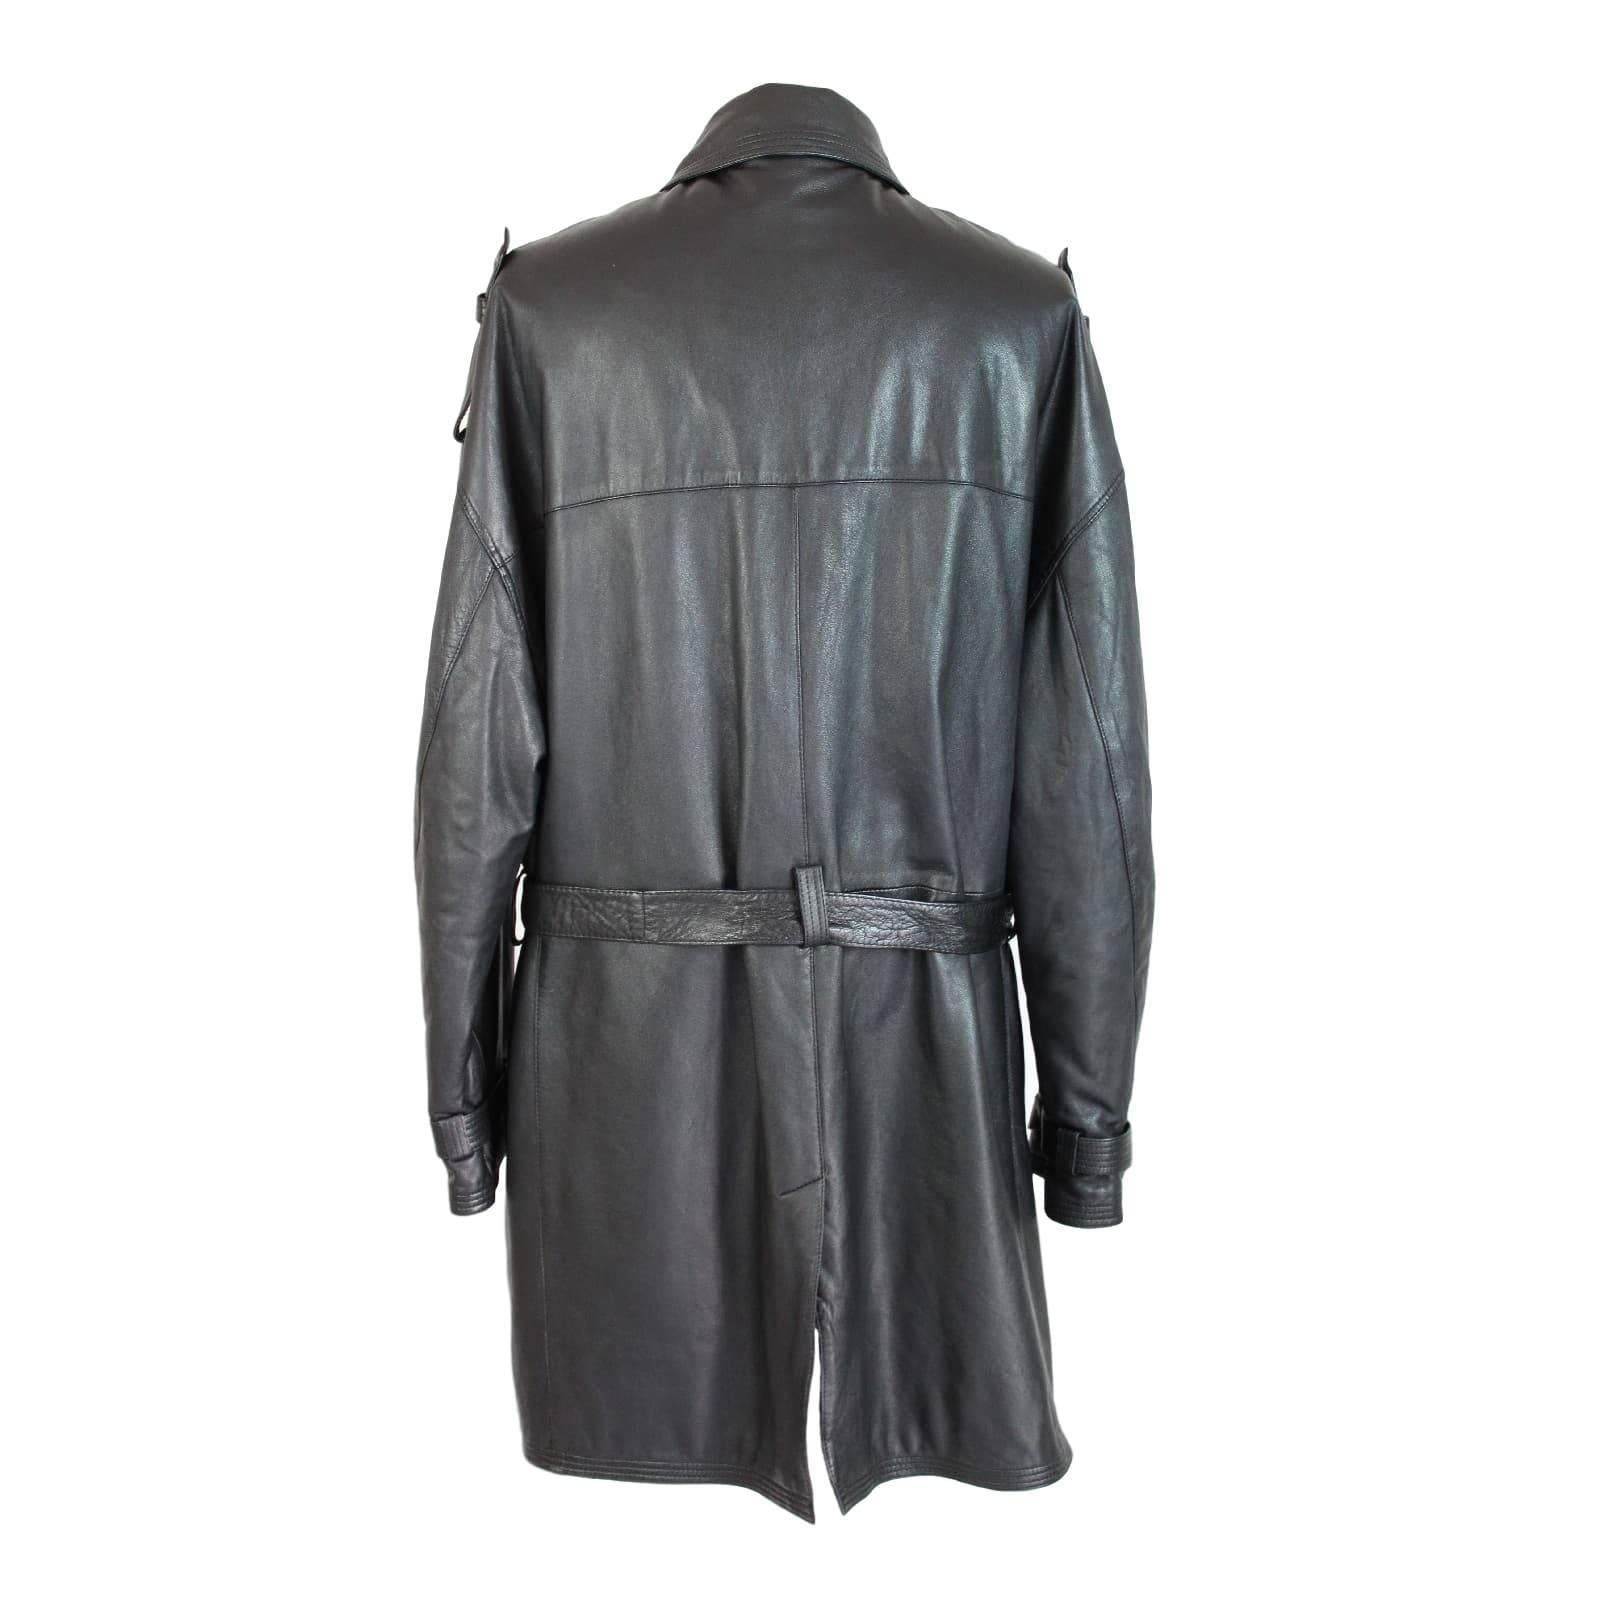 Black Versus Gianni Versace black leather motorcycle raincoat trench coat size 38/52 For Sale